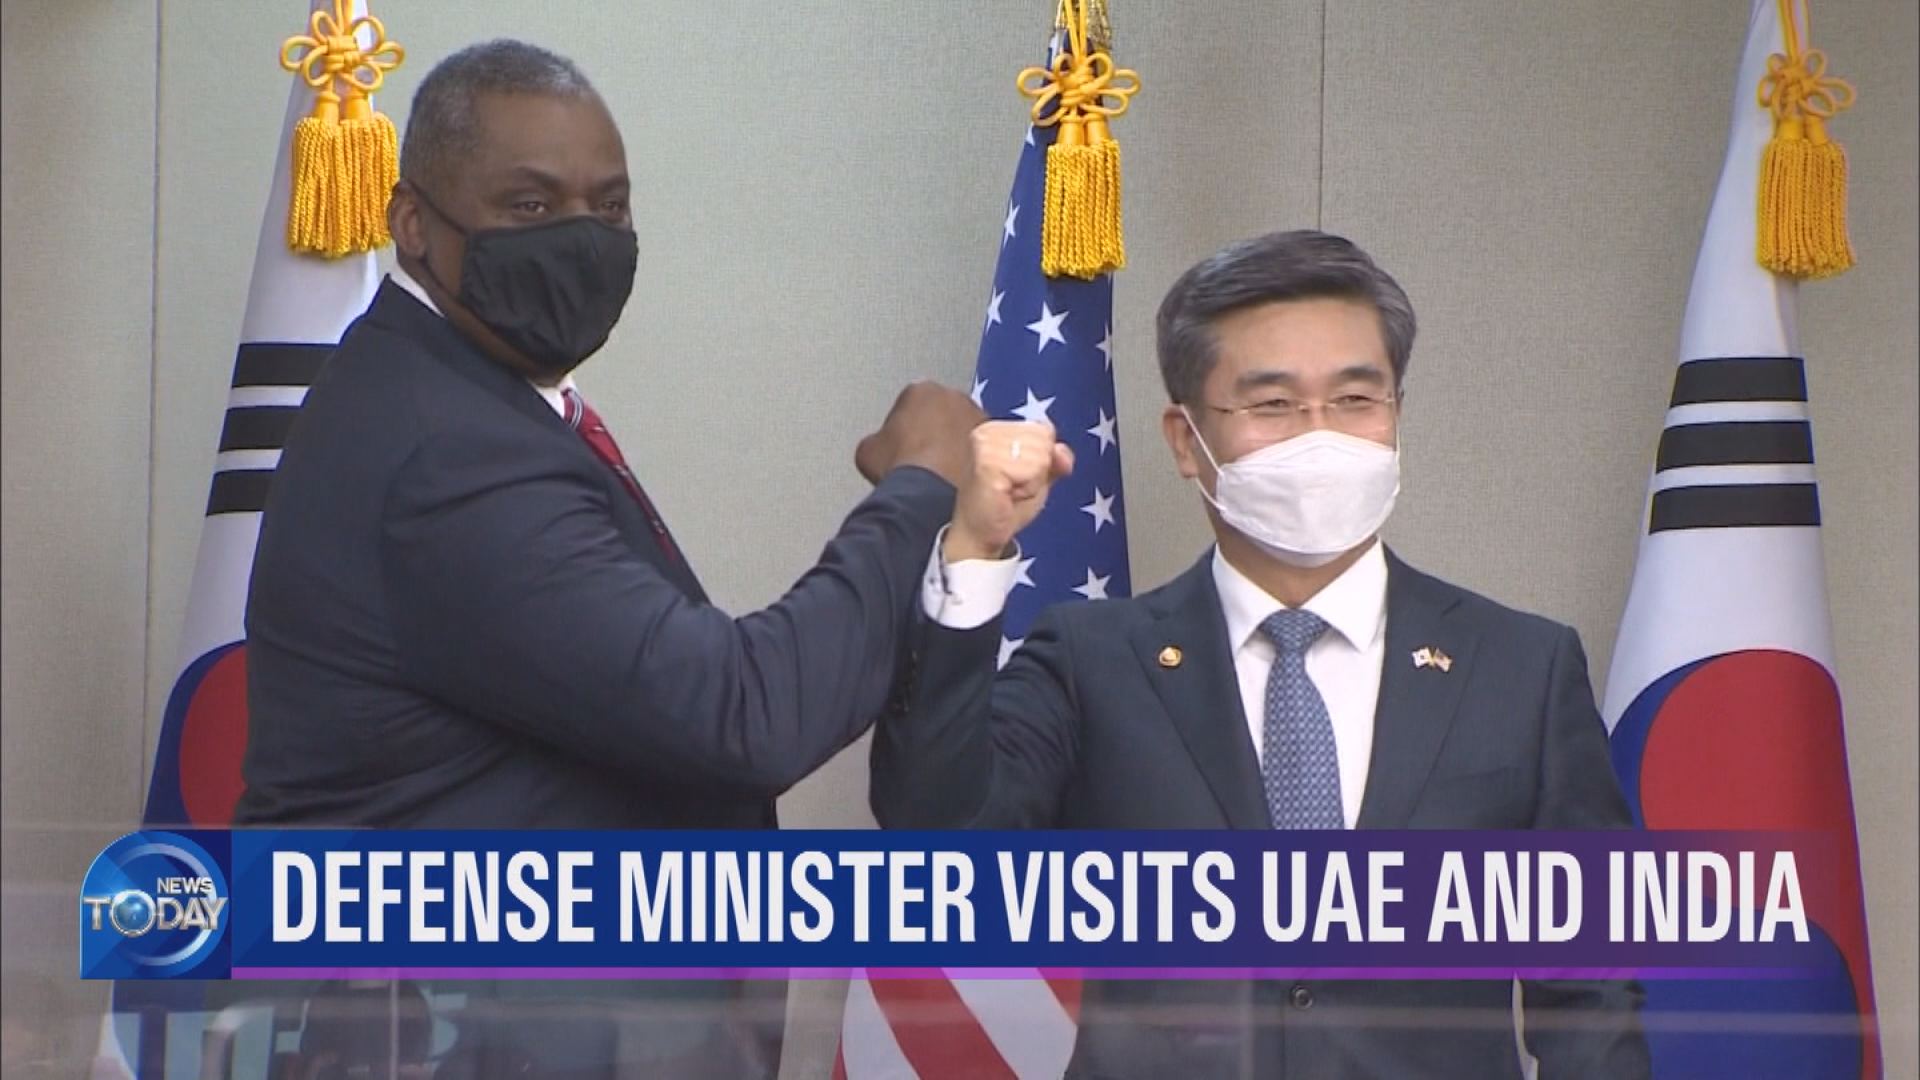 DEFENSE MINISTER VISITS UAE AND INDIA